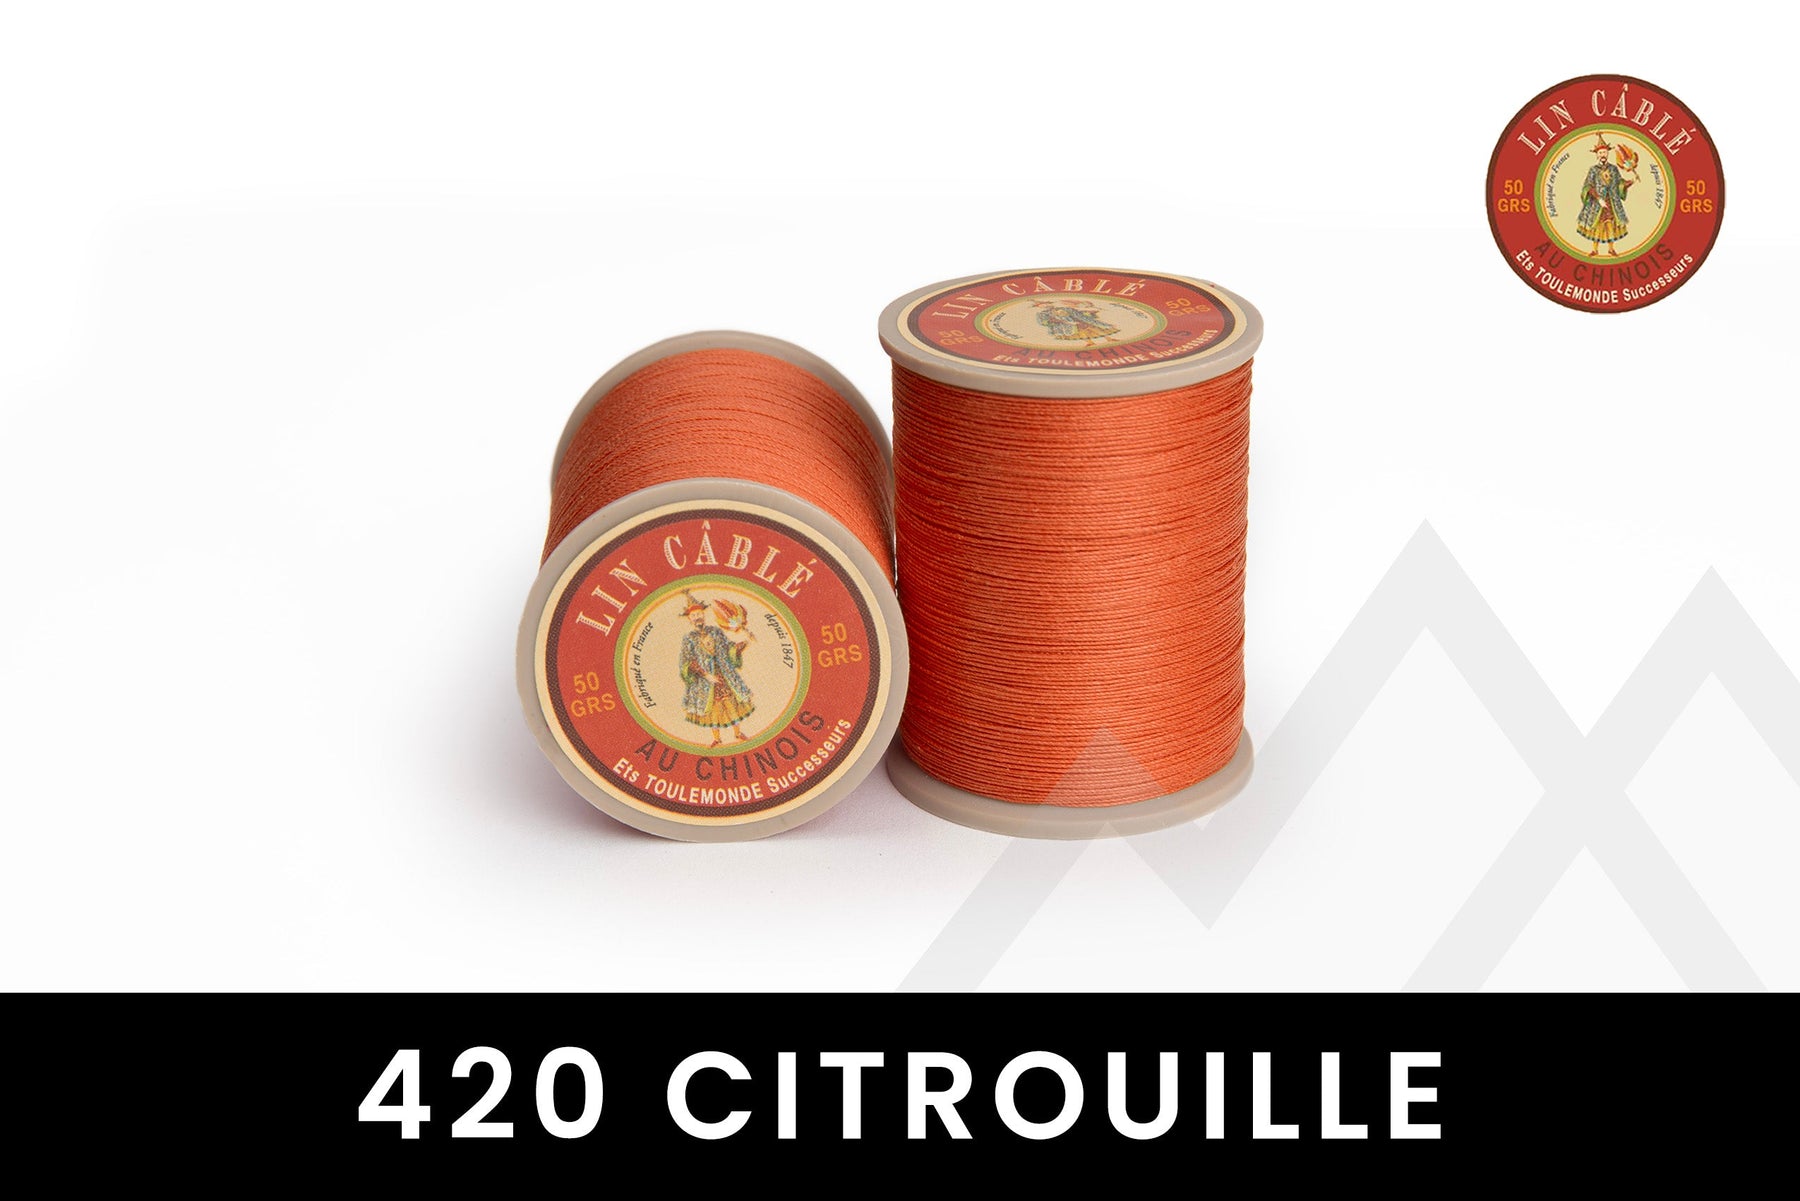 Fil au Chinois 🇫🇷 - "Lin Cable" Waxed Linen Thread (Size 432) *Full Spool